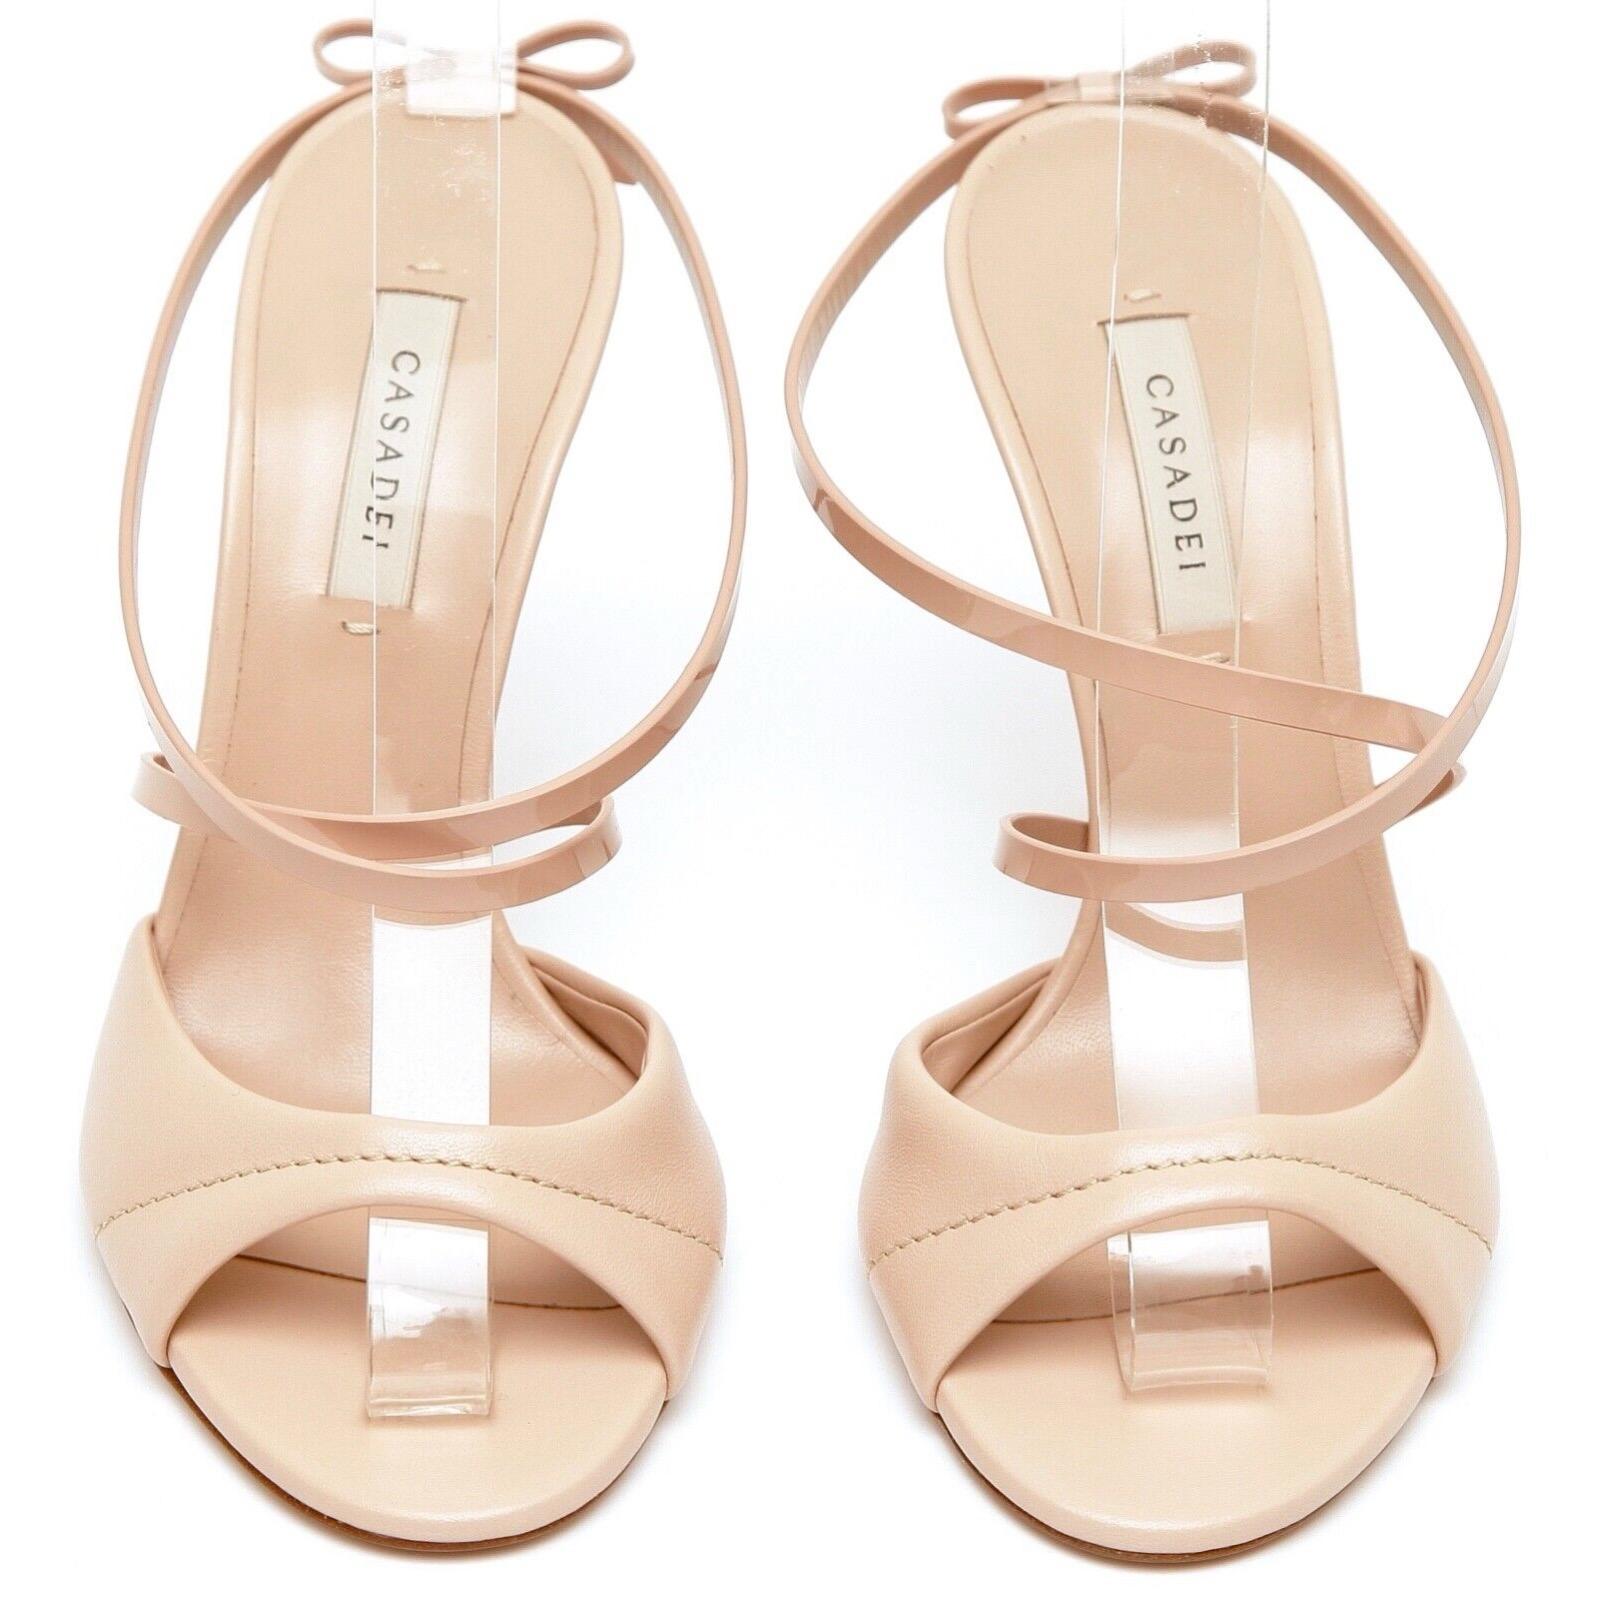 Beige CASADEI Leather Sandal Mule PENNY Blade Blush Pink Heel Bow Strappy Sz 38 NEW